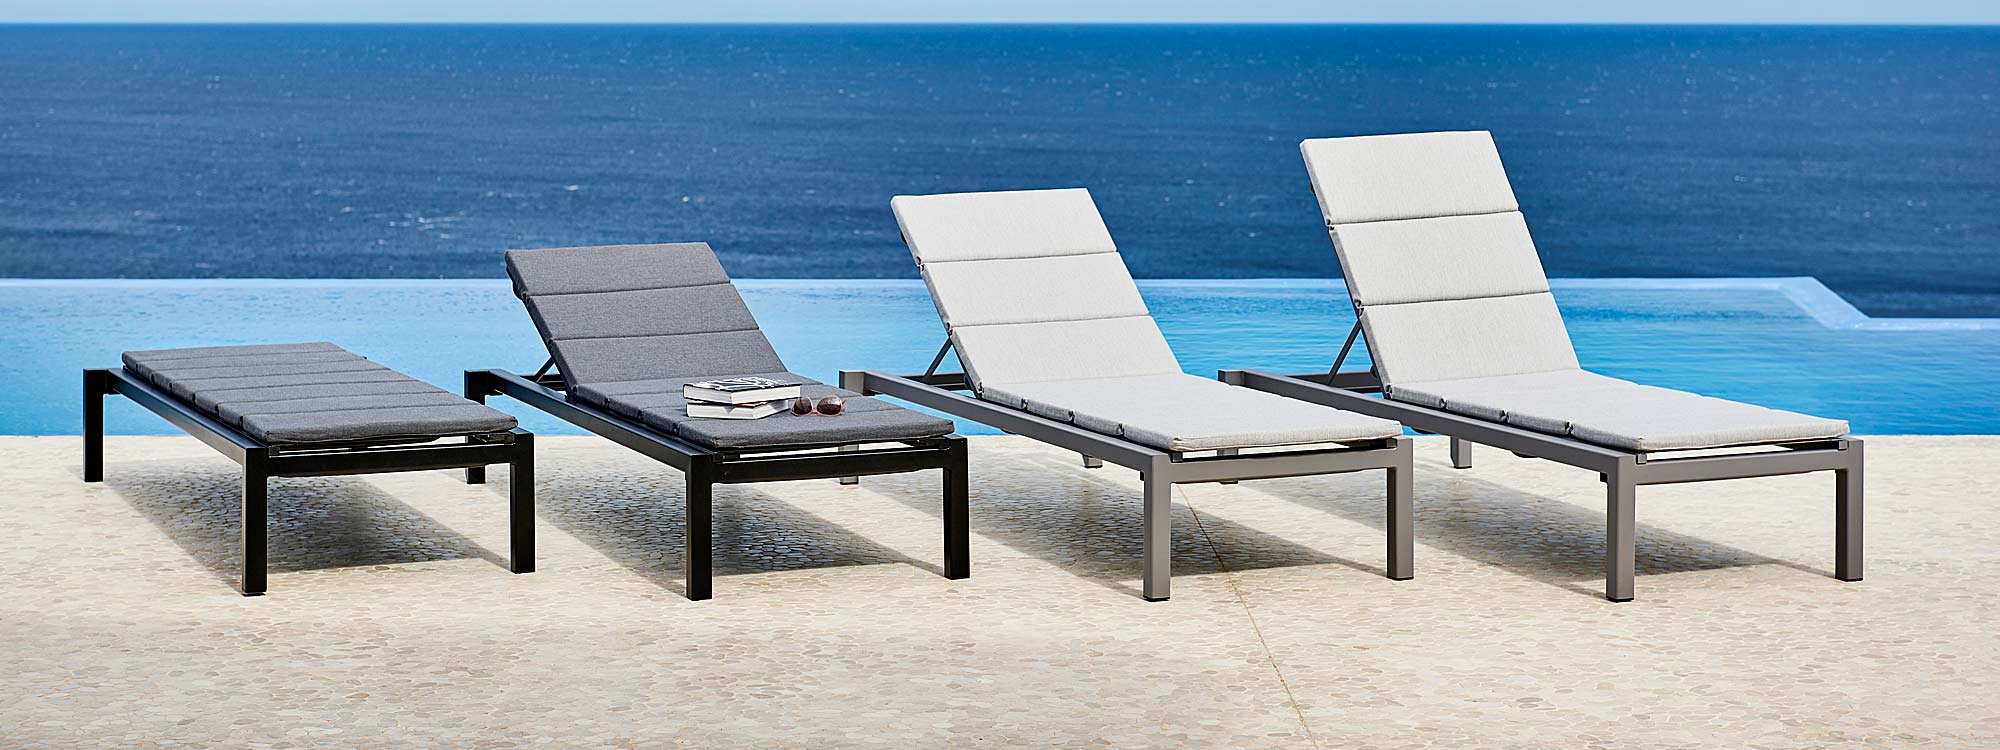 Relax aluminium sun lounger is a stackable, modern sunbed in high quality garden furniture by Cane-line outdoor furniture company, Denmark.